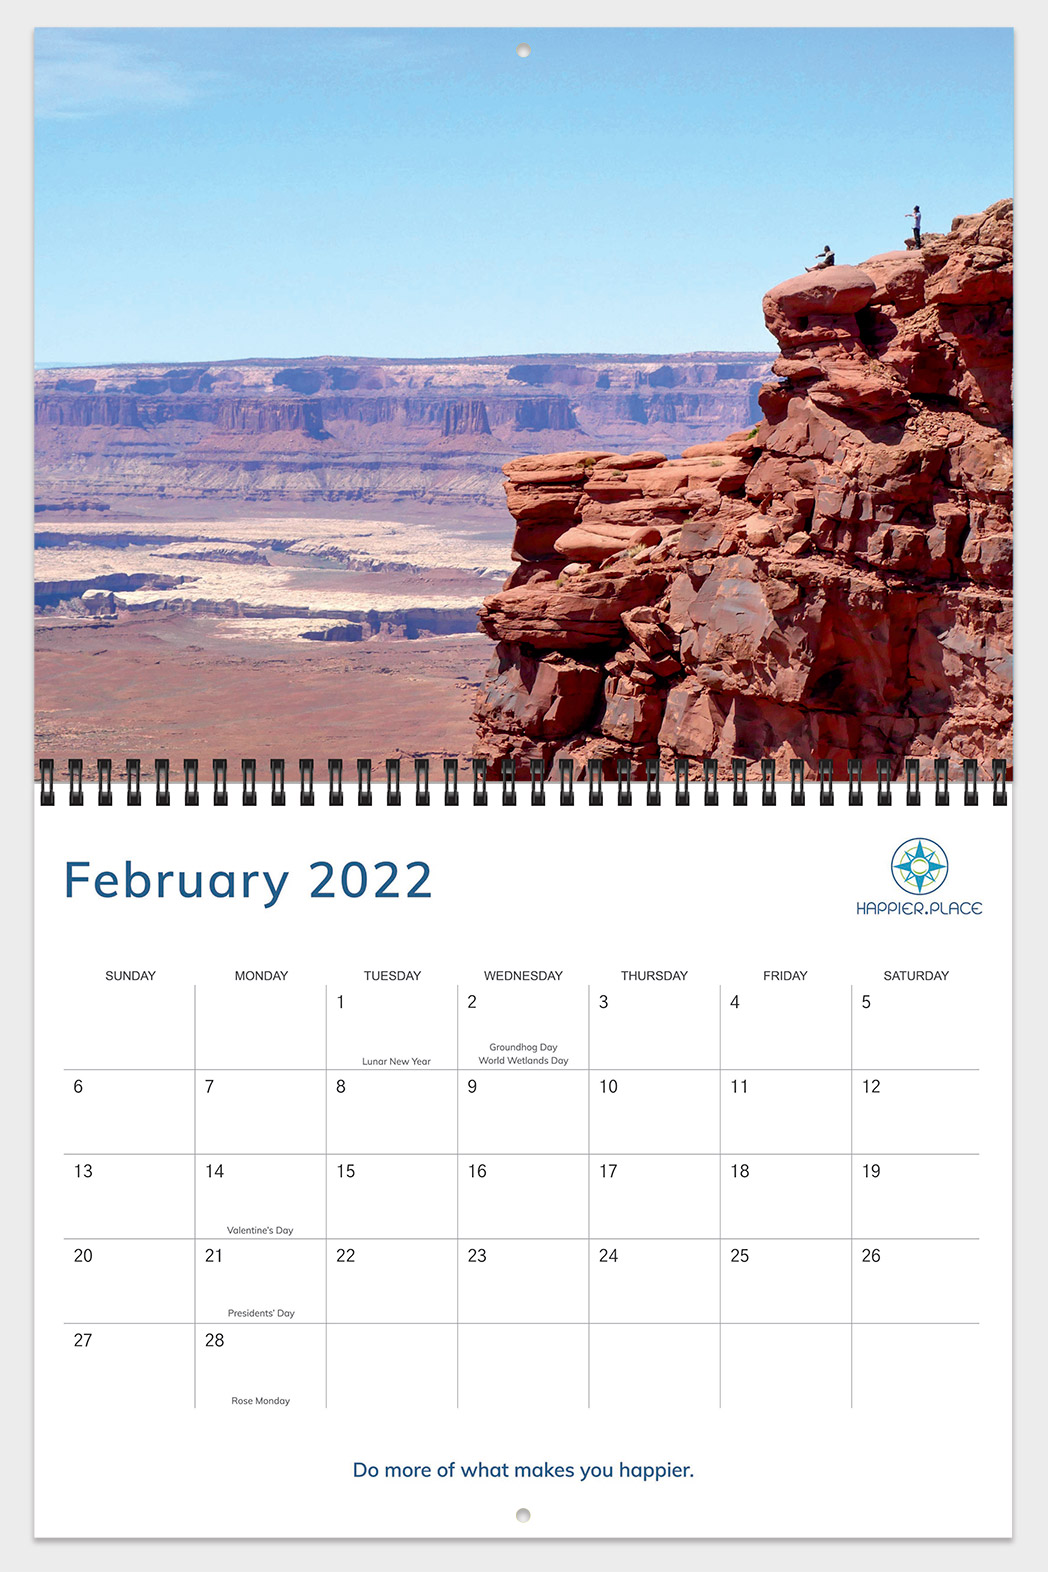 February 2022 Happier Place Calendar, Canyonlands National Park, Utah, men on cliff pointing